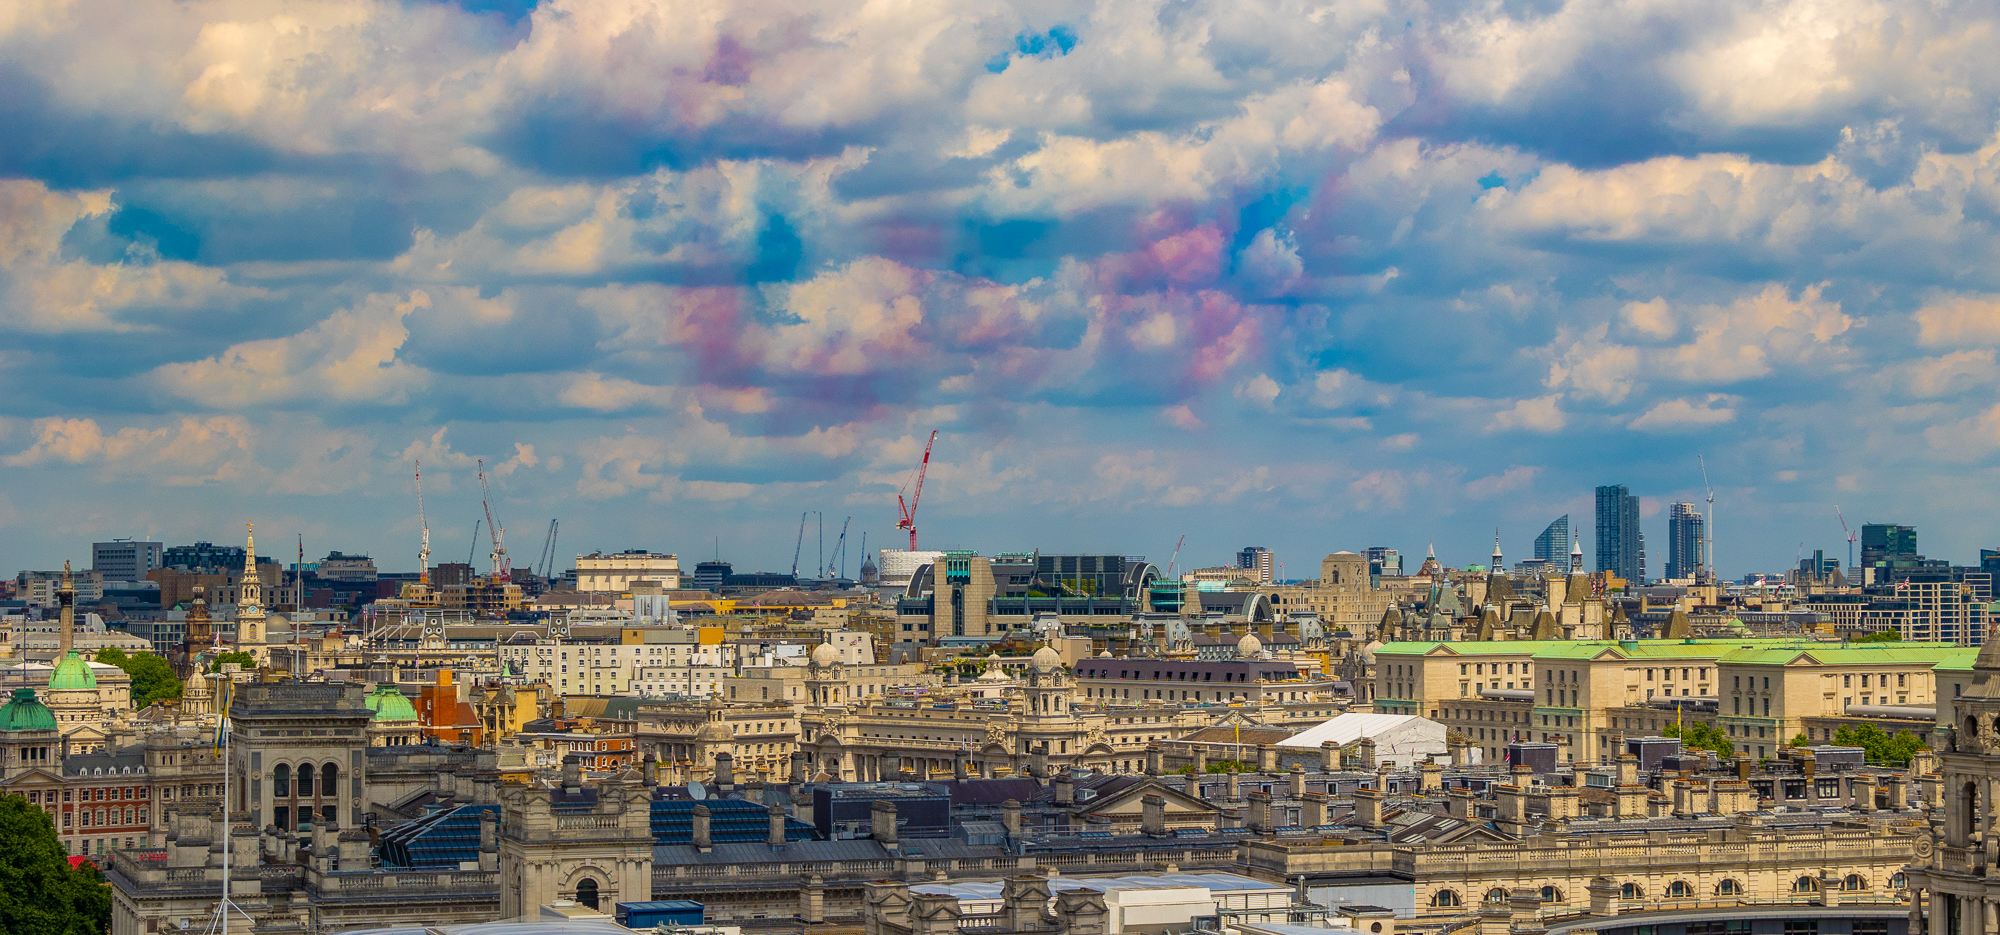 Platinum Jubilee Sky Over London By Tim Hodges